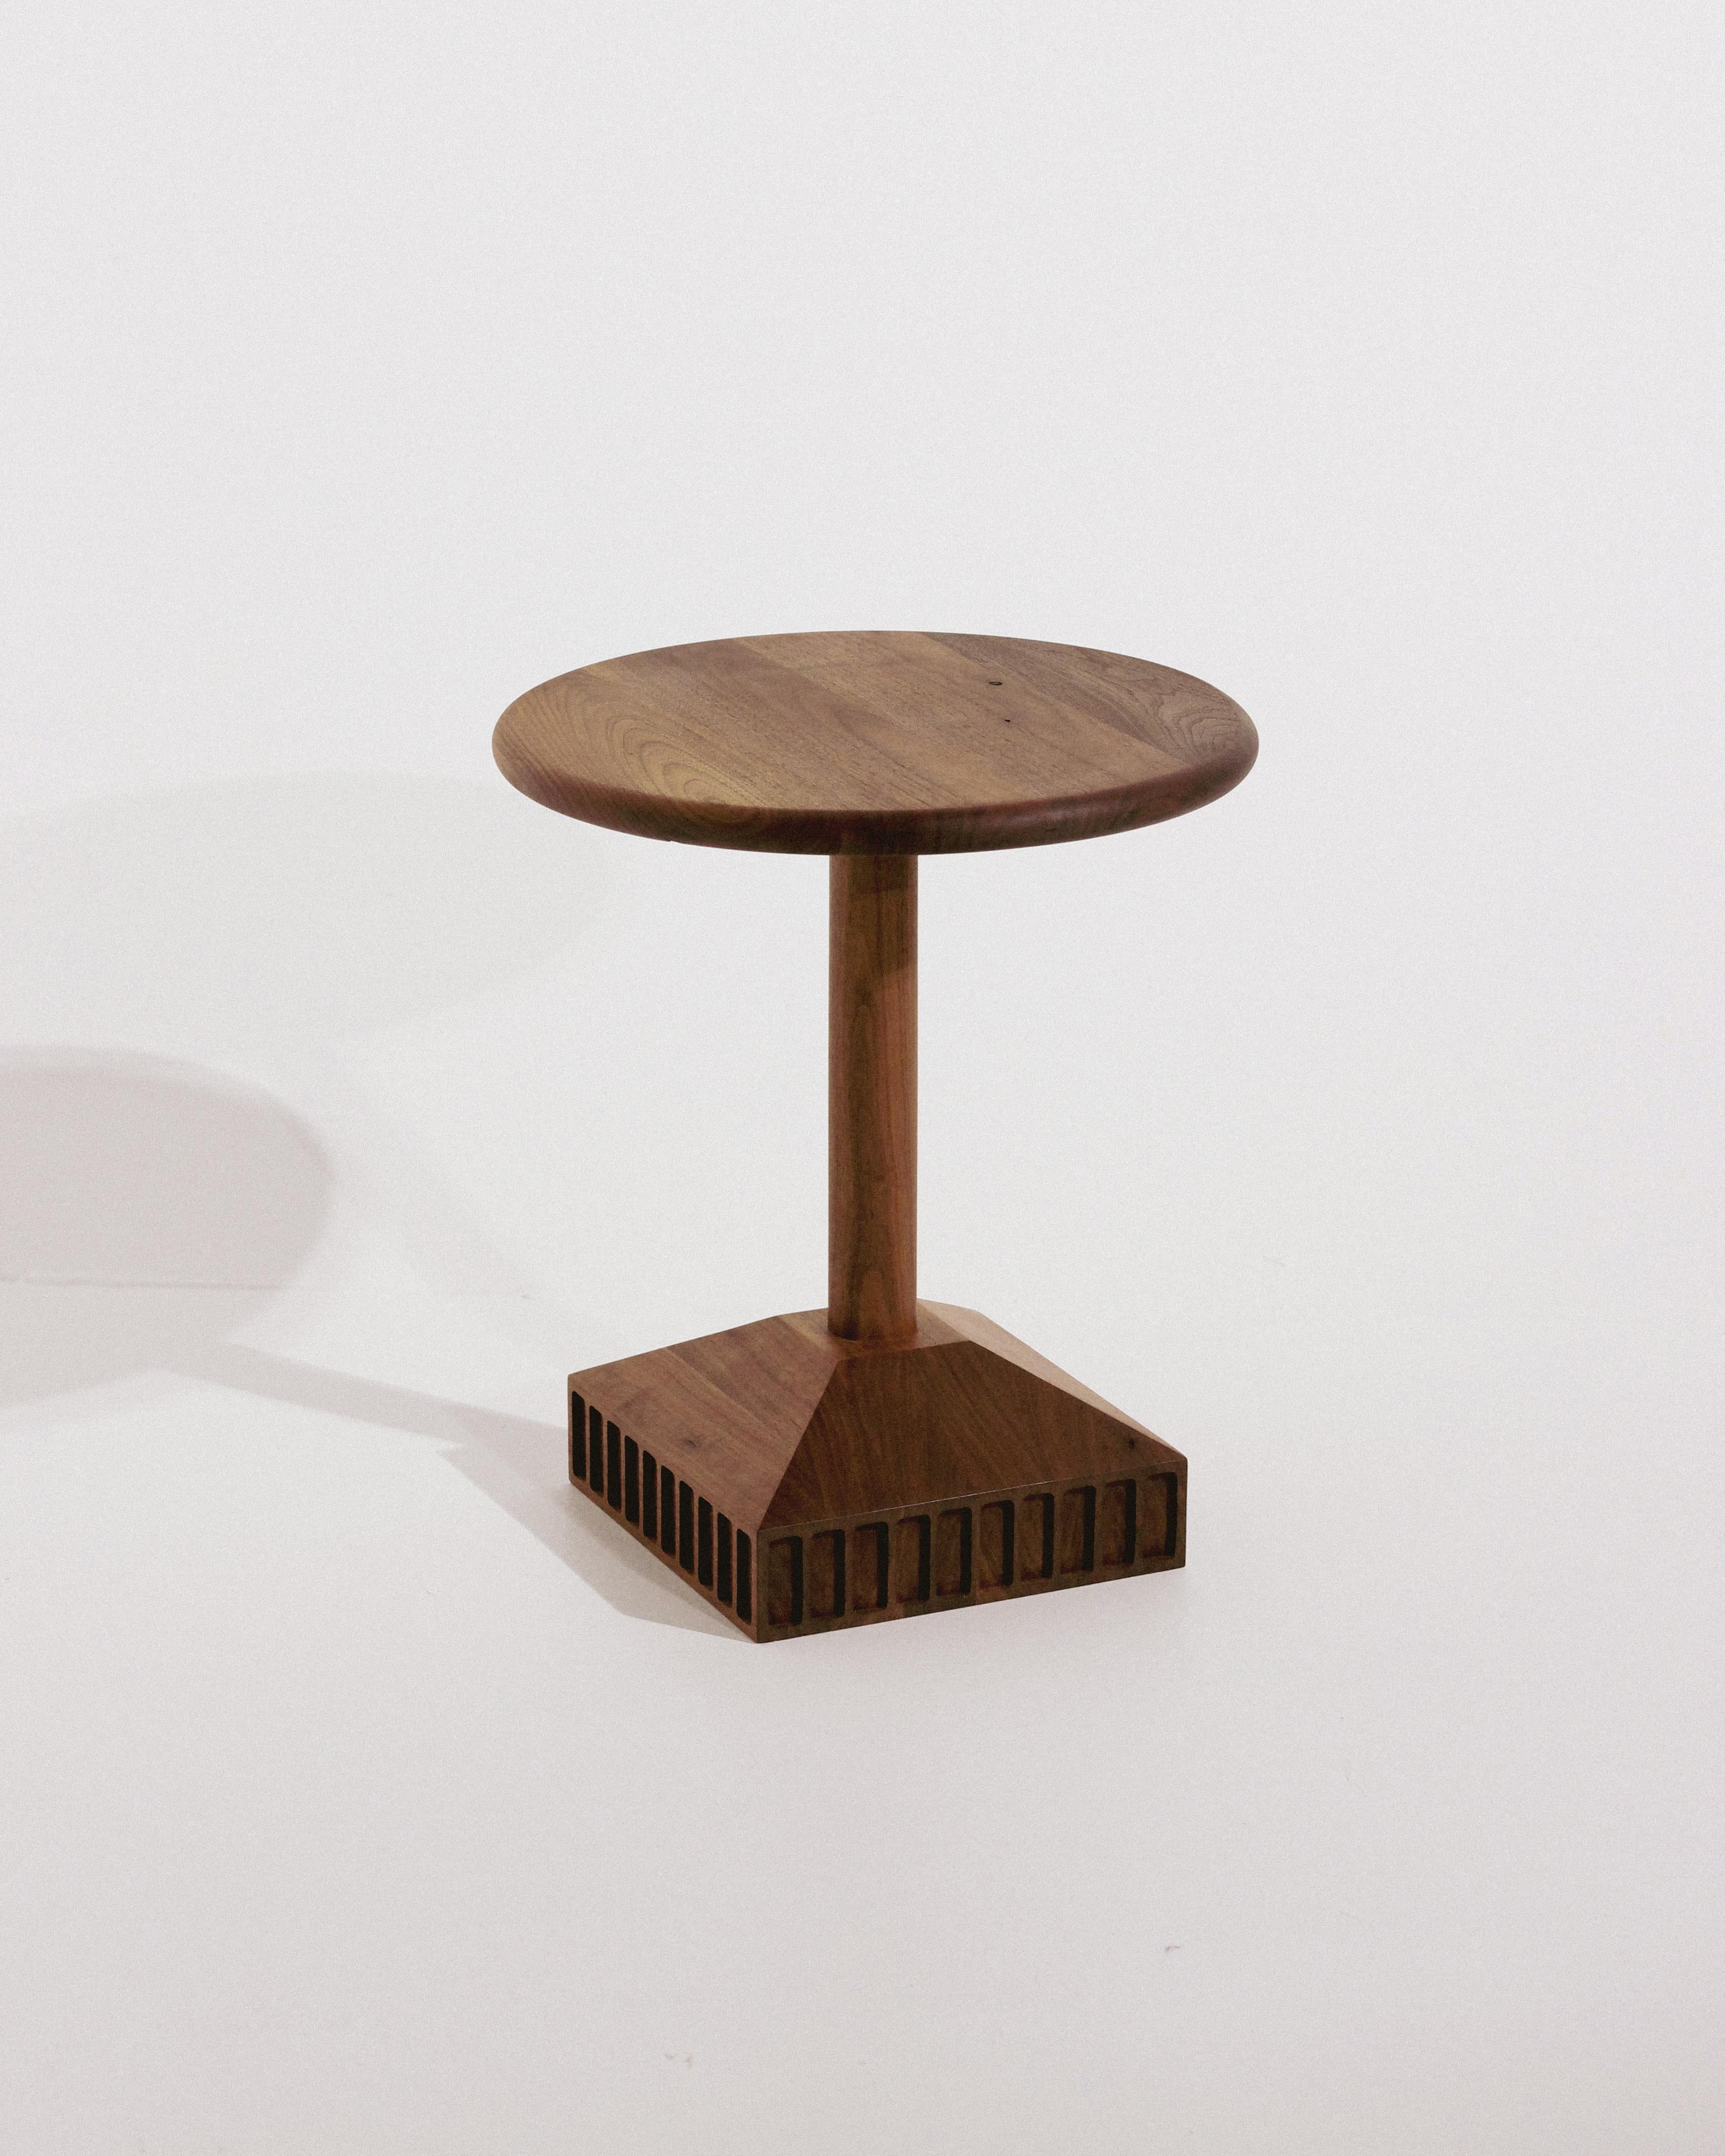 Occasional SIde Table, 2023

Origin: Made in Los Angeles, CA

Dimensions: 17.5